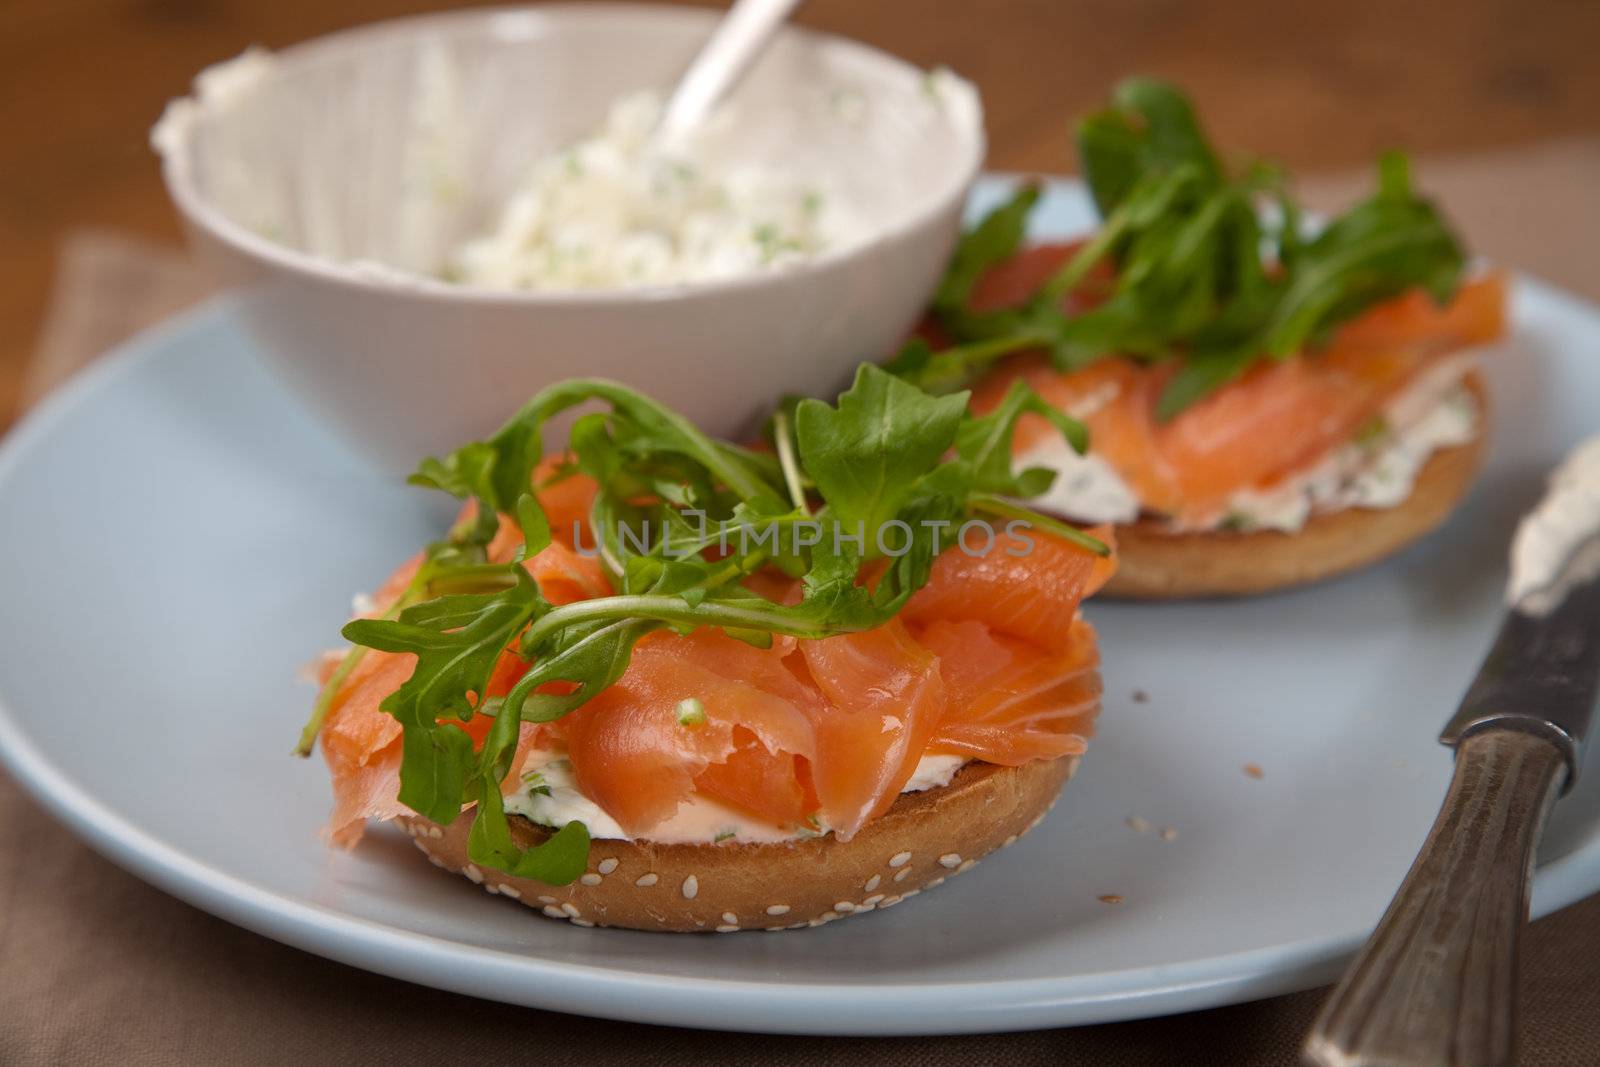 Delicious creamcheese bagel with smoked salmon and rocket